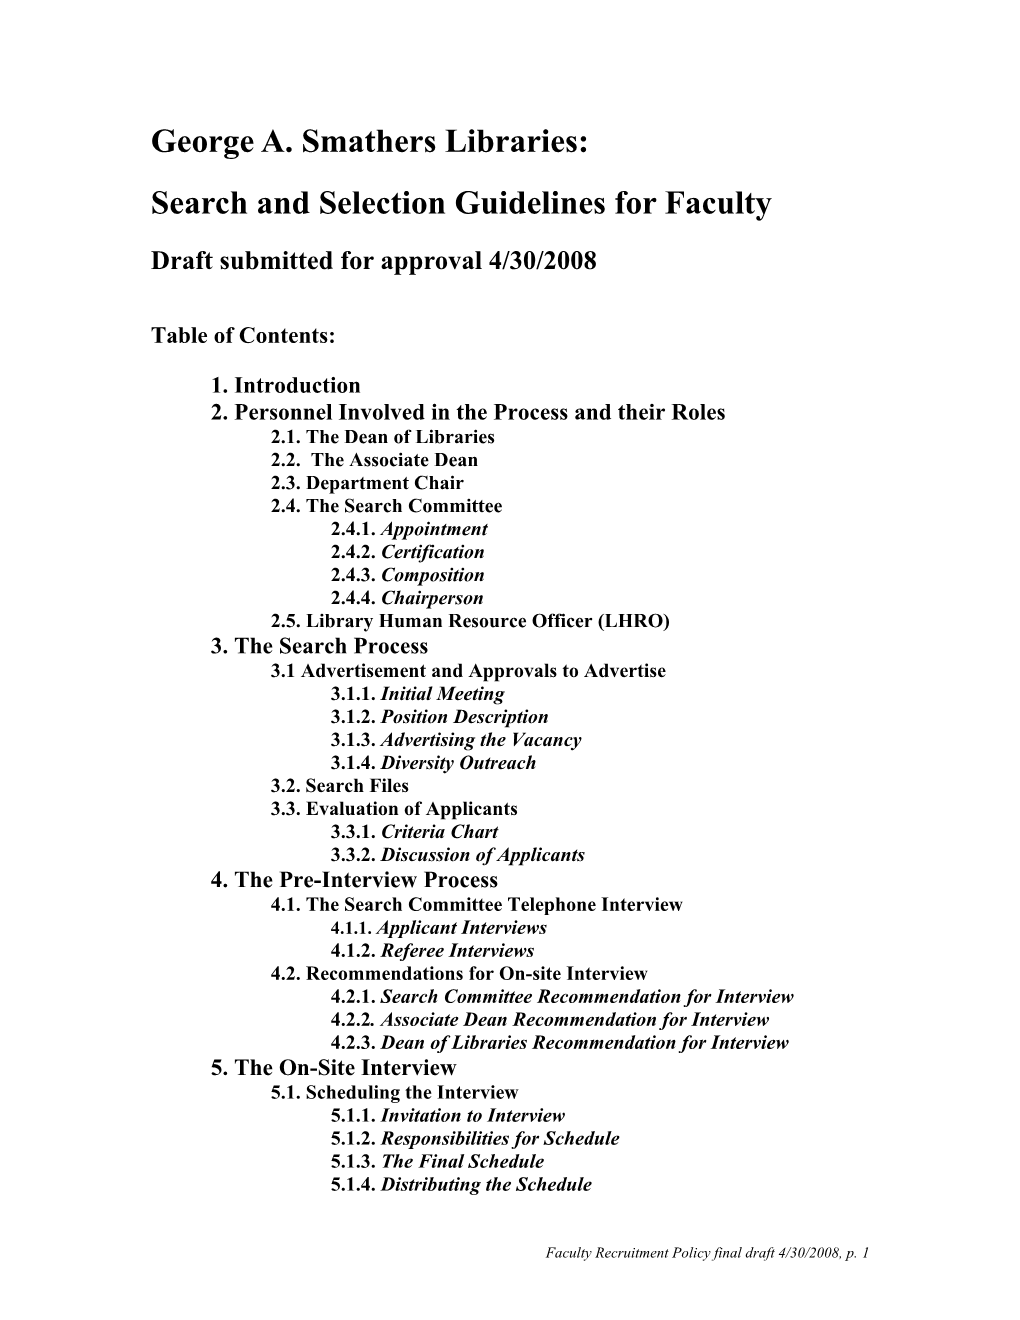 Search and Selection Guidelines for Faculty